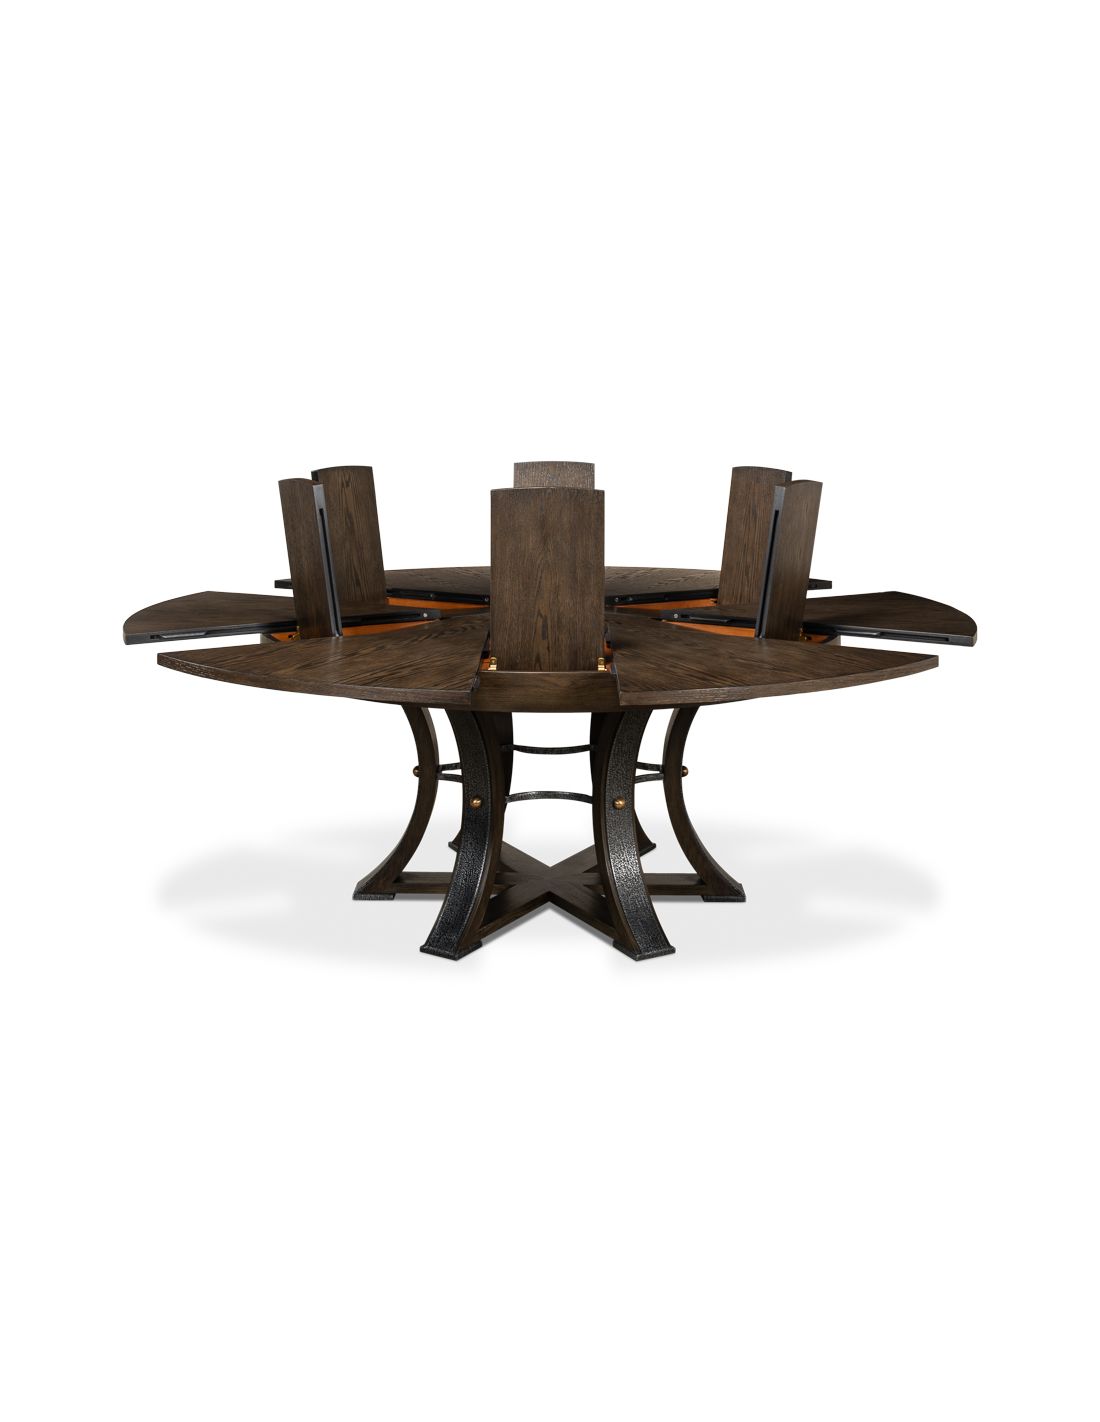 large round dining room tables with leaves